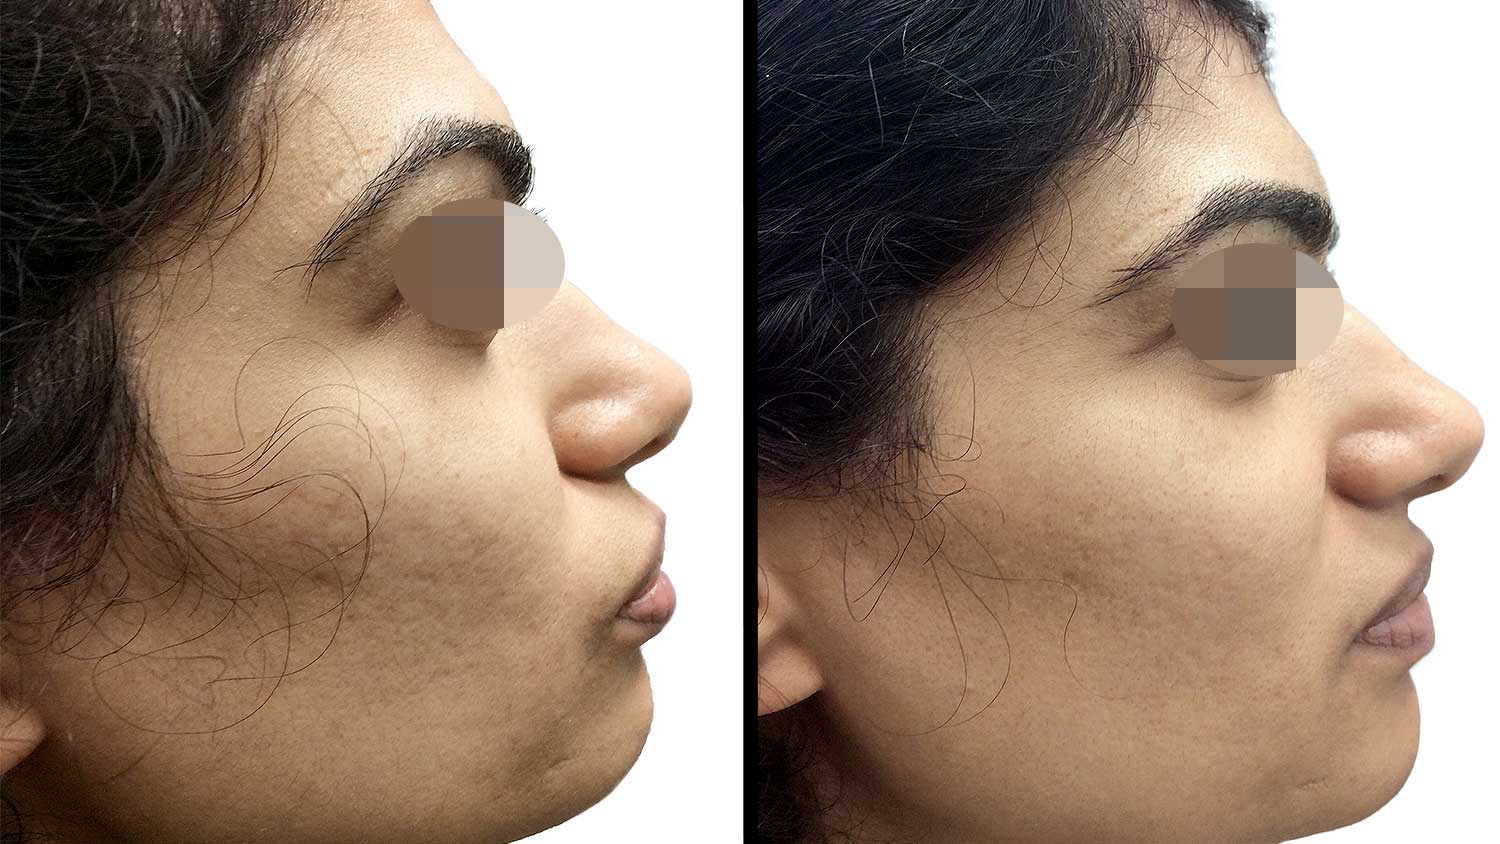 Microneedling with PRP for Acne Scarring with Dr. Rachel Pritzker